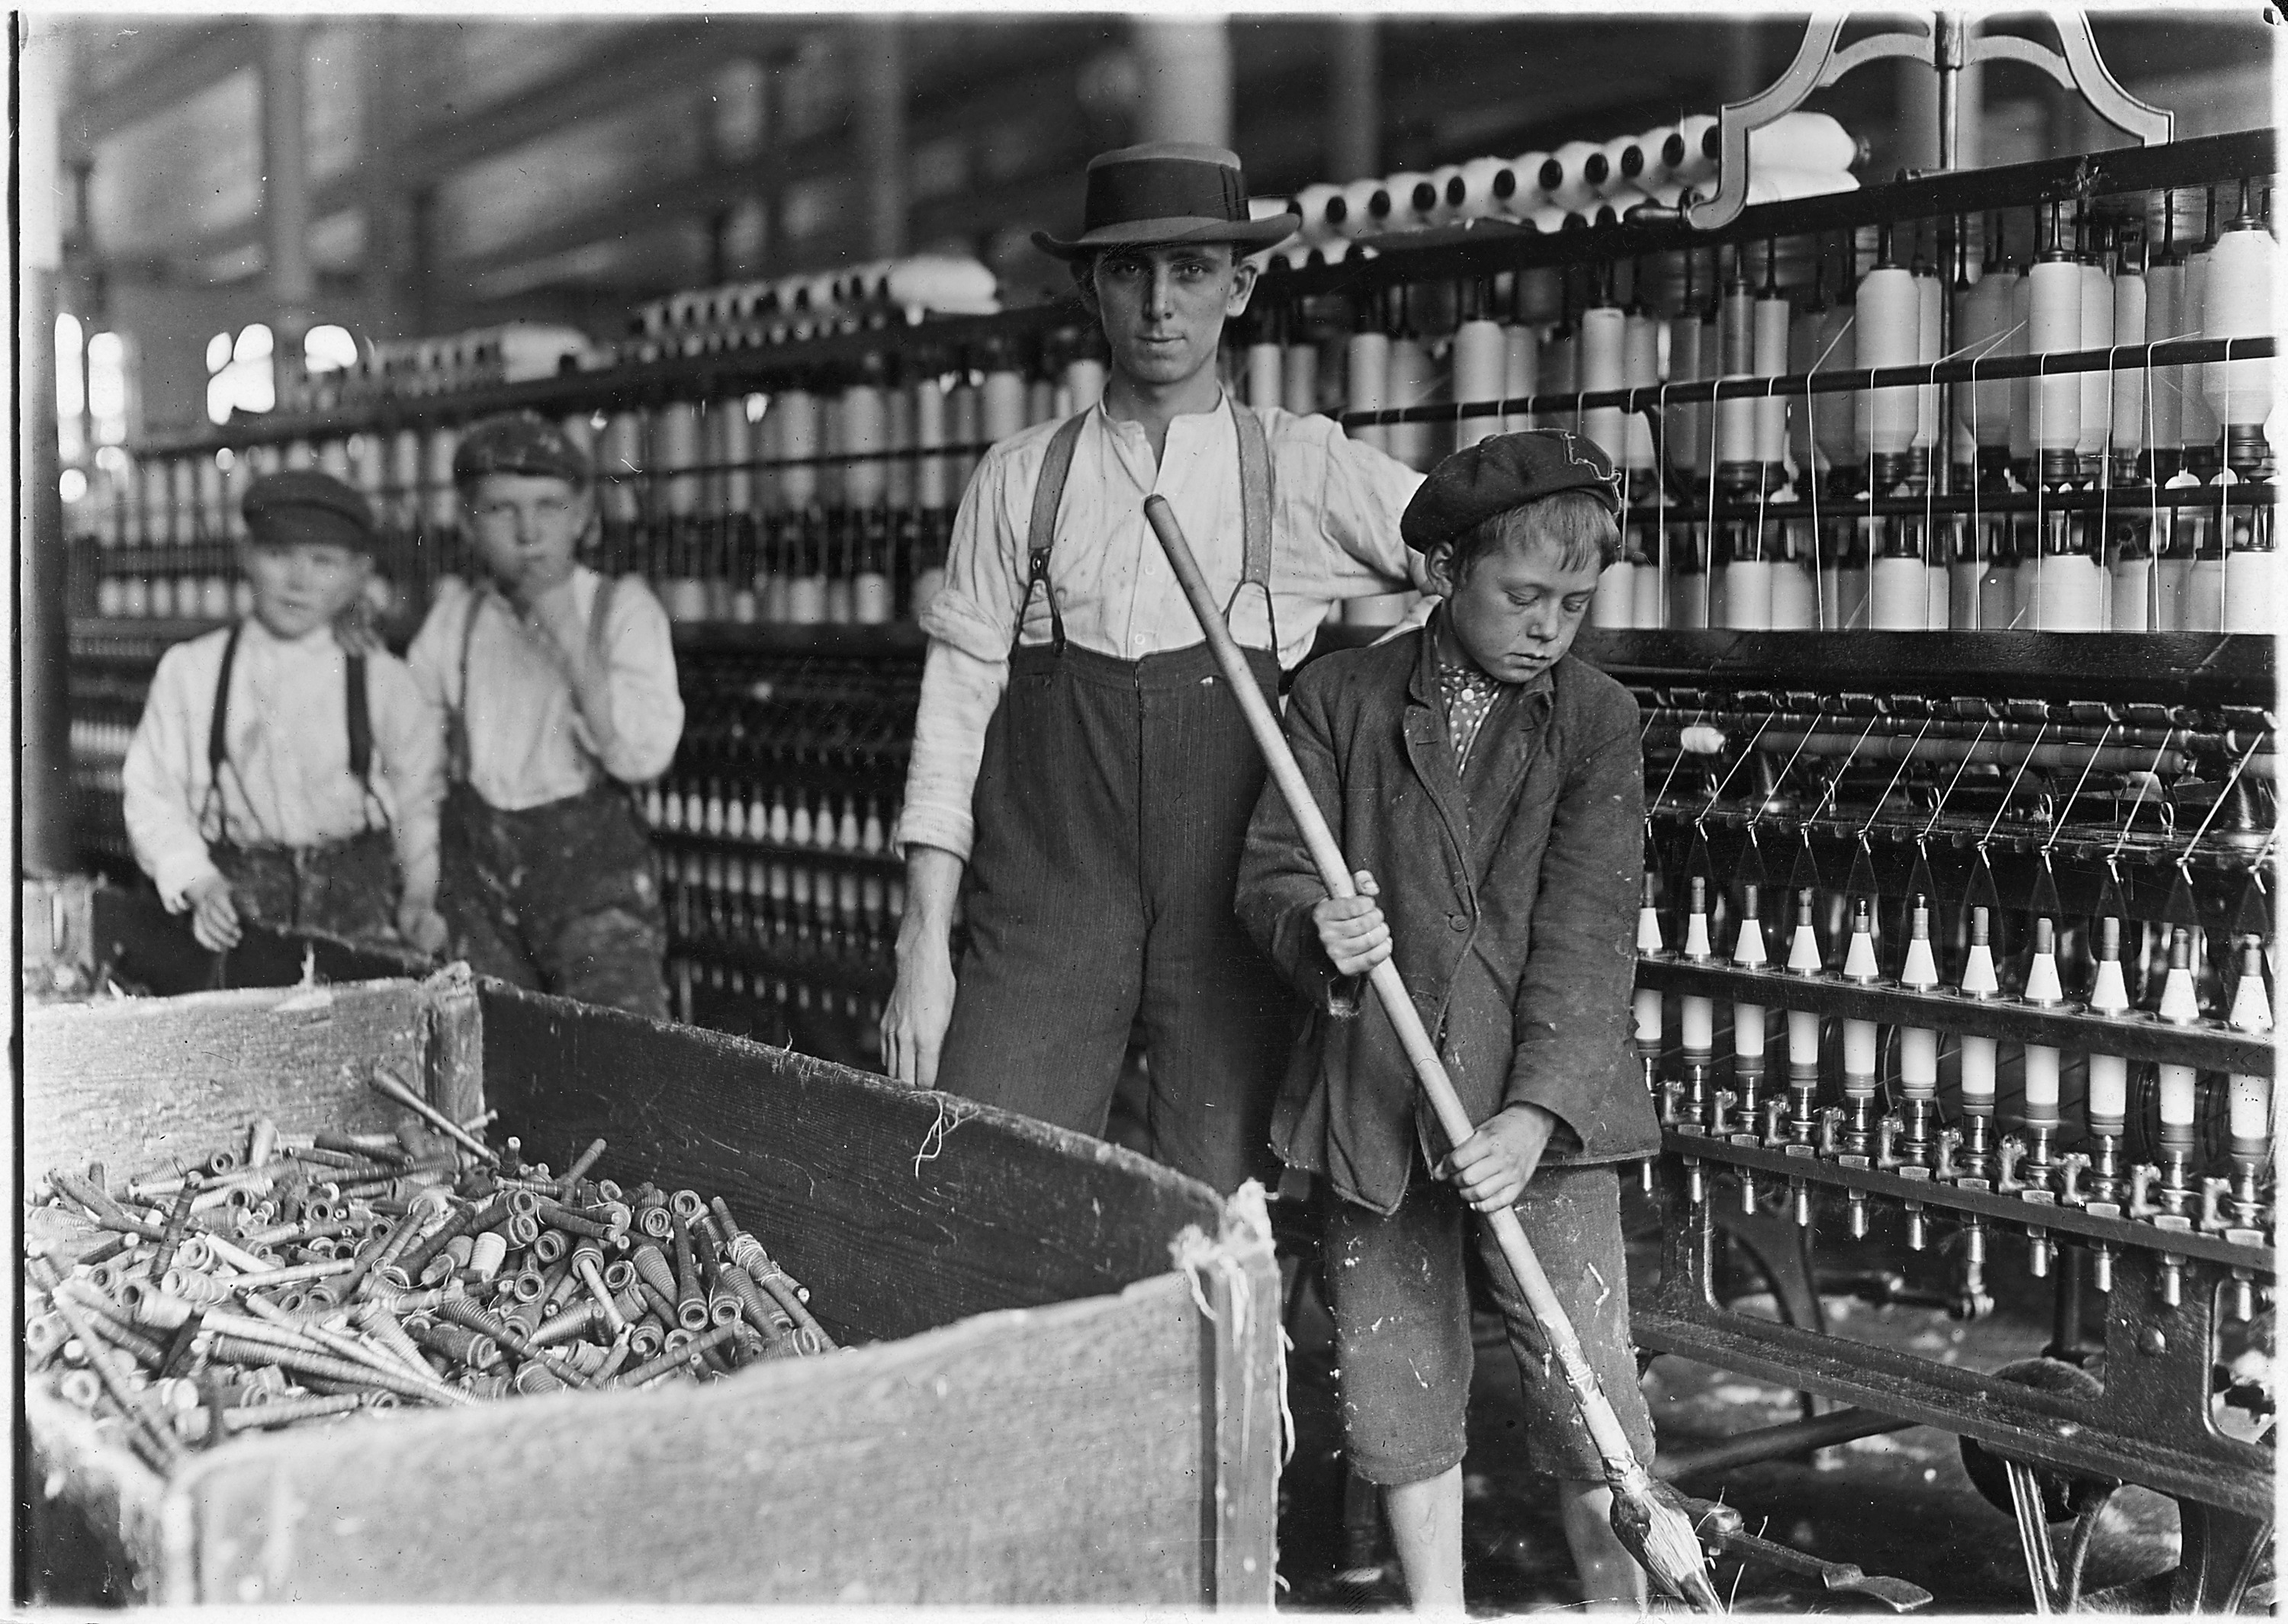 Sweeper and doffer boys in Lancaster Cotton Mills. Many more as small. Lancaster, S.C. - NARA - 523120